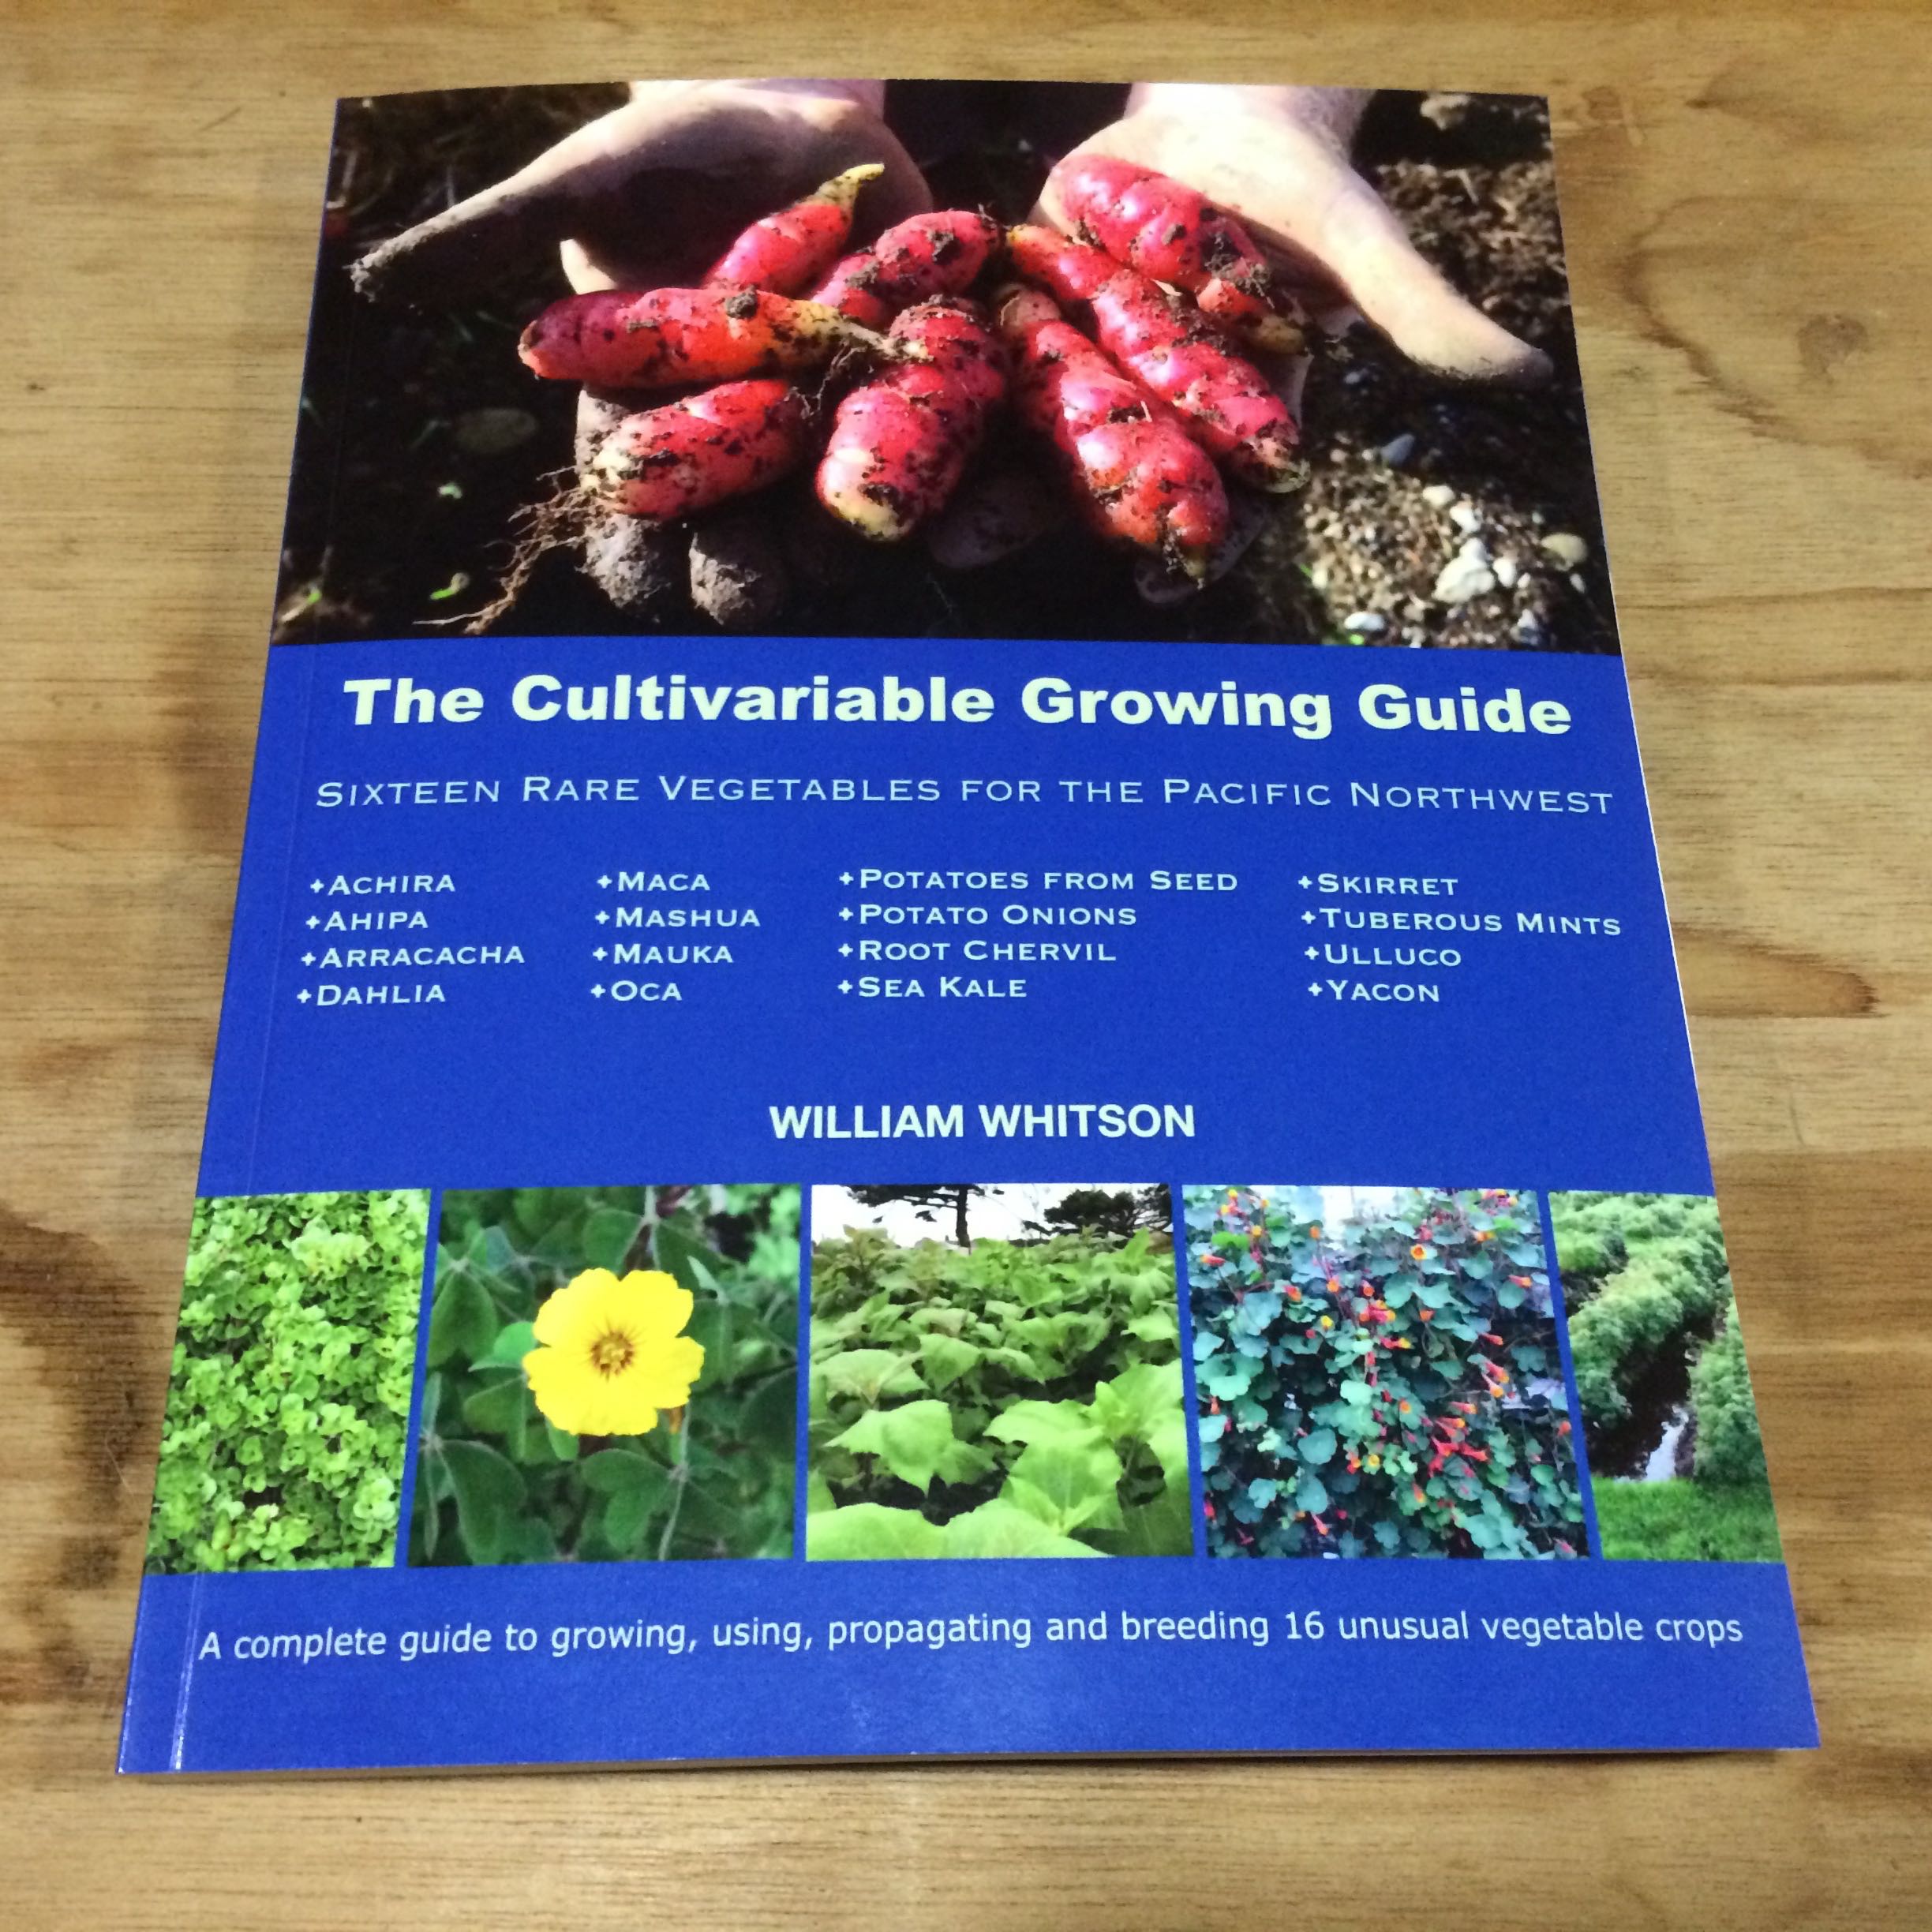 Yacon (Smallanthus sonchifolius) - The Cultivariable Growing Guide